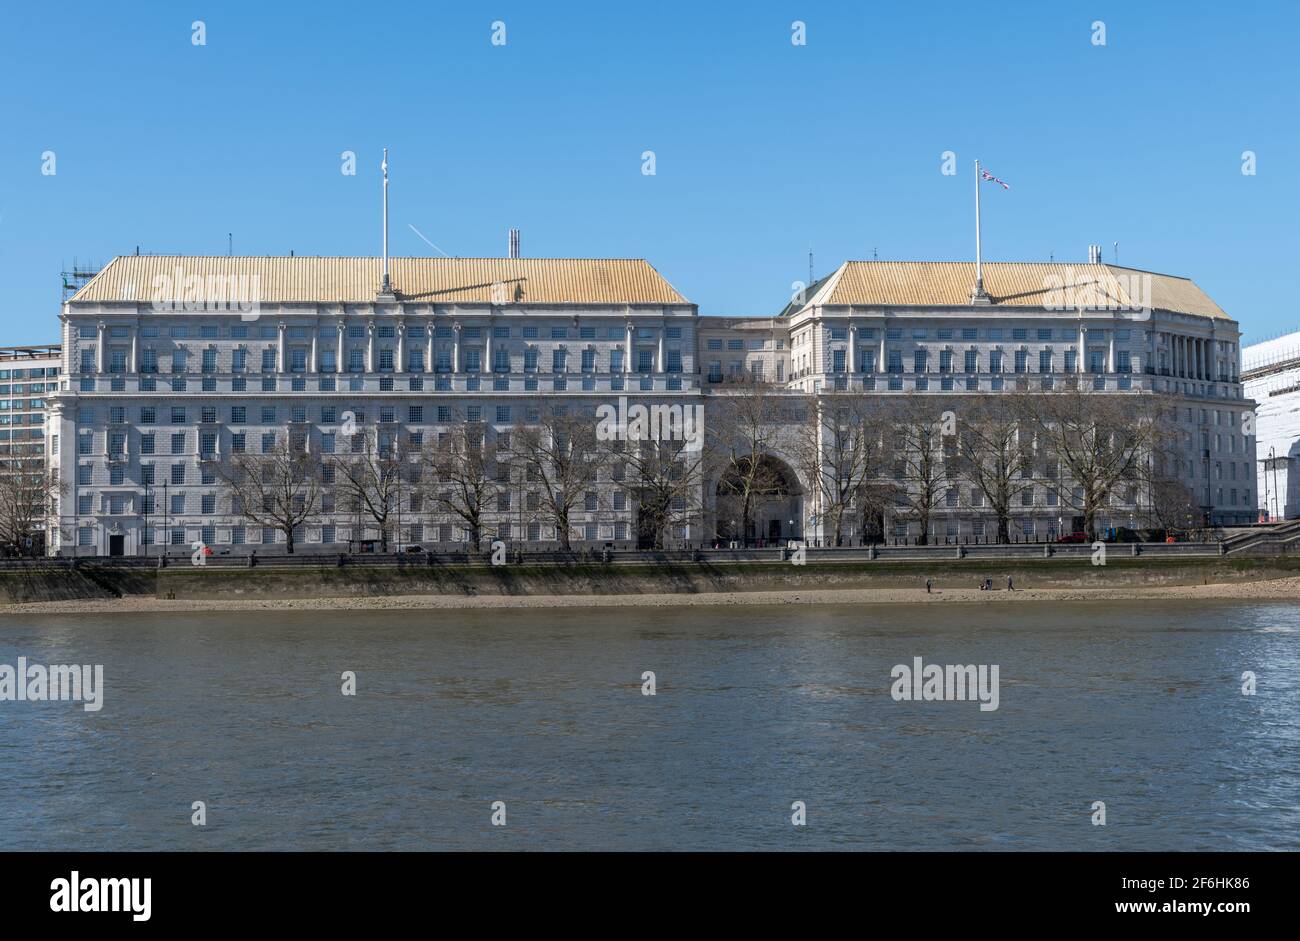 The headquarter building of MI5, British domestic secret security service responsible for homeland security and counter espionage and terrorism. Stock Photo